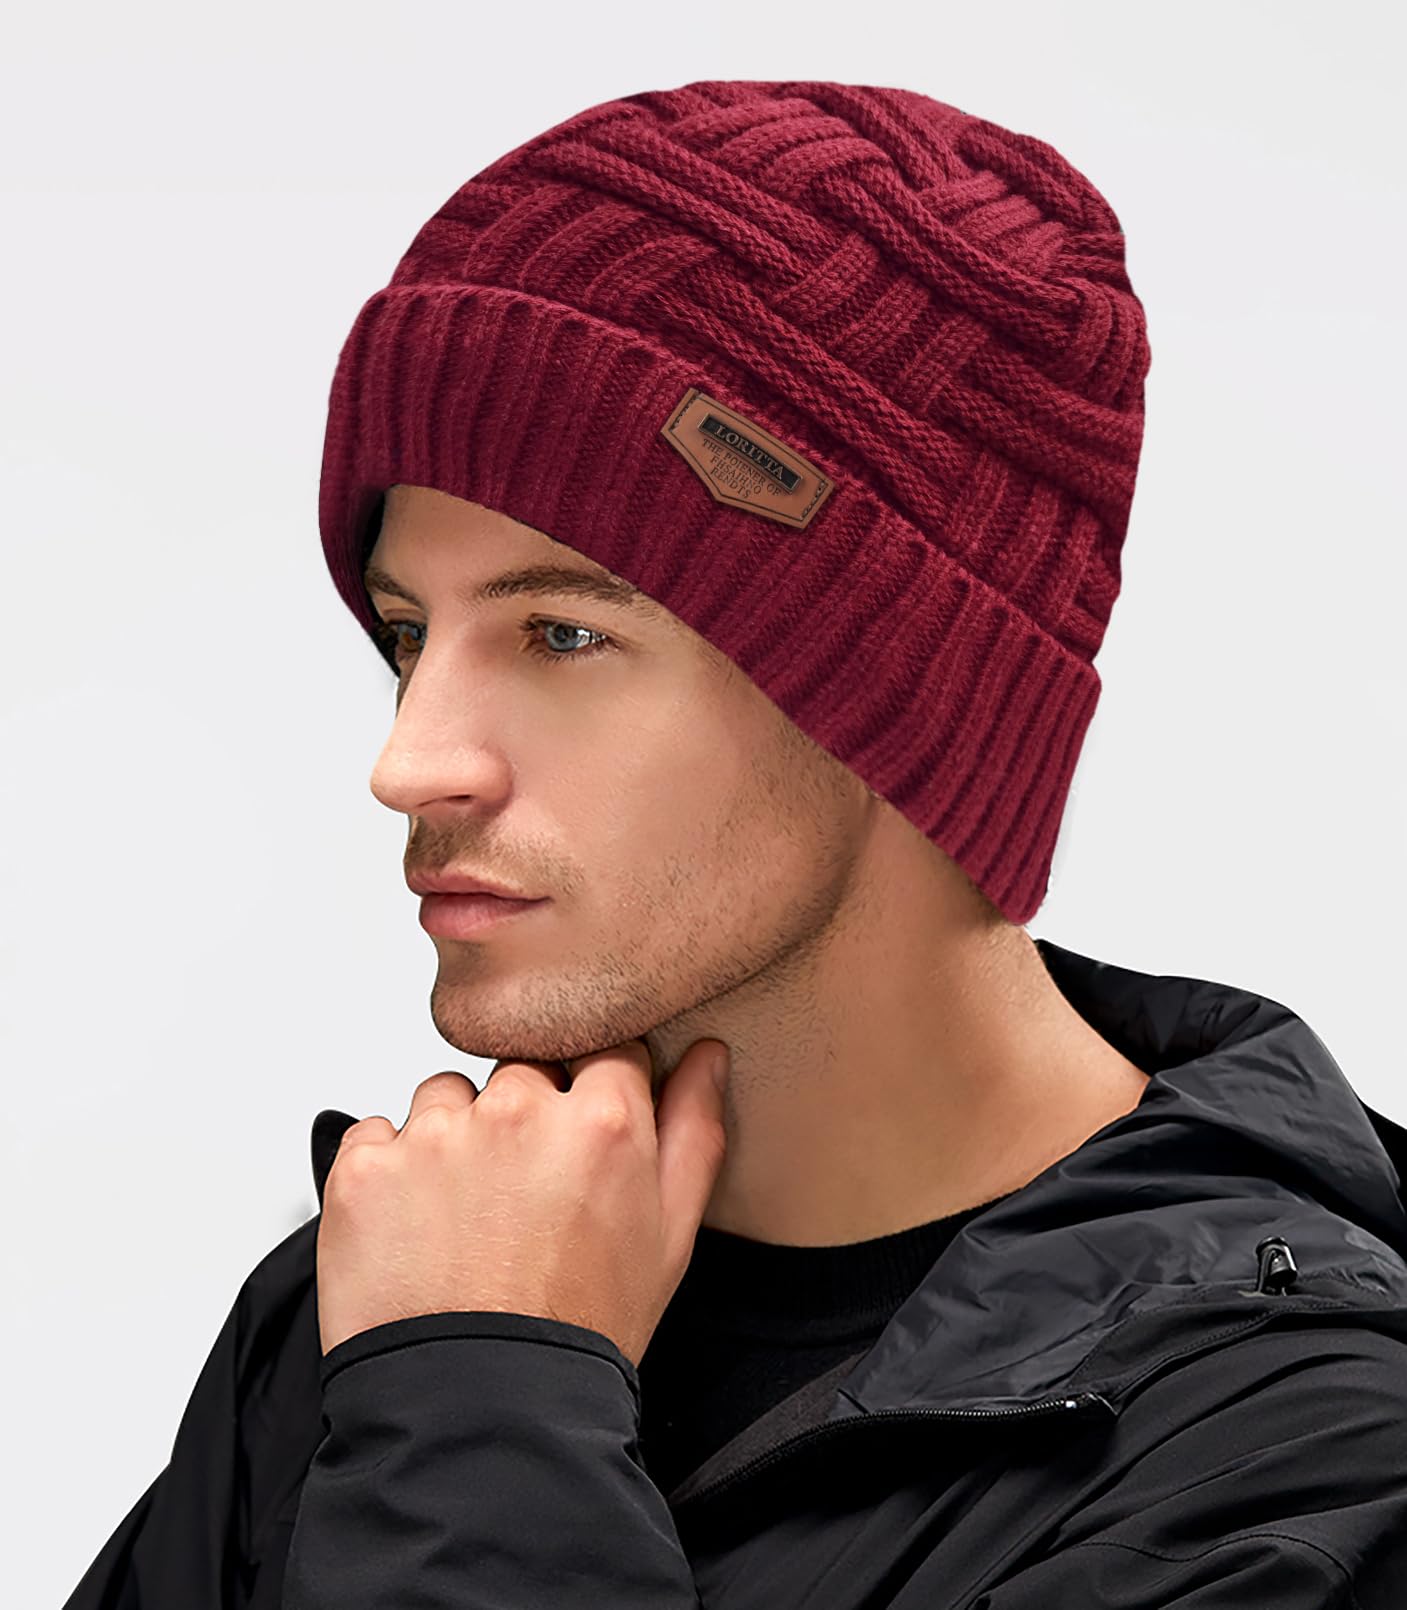 Loritta Winter Hat Warm Knitted Thick Baggy Slouchy Beanie Skull Cap Men Gifts